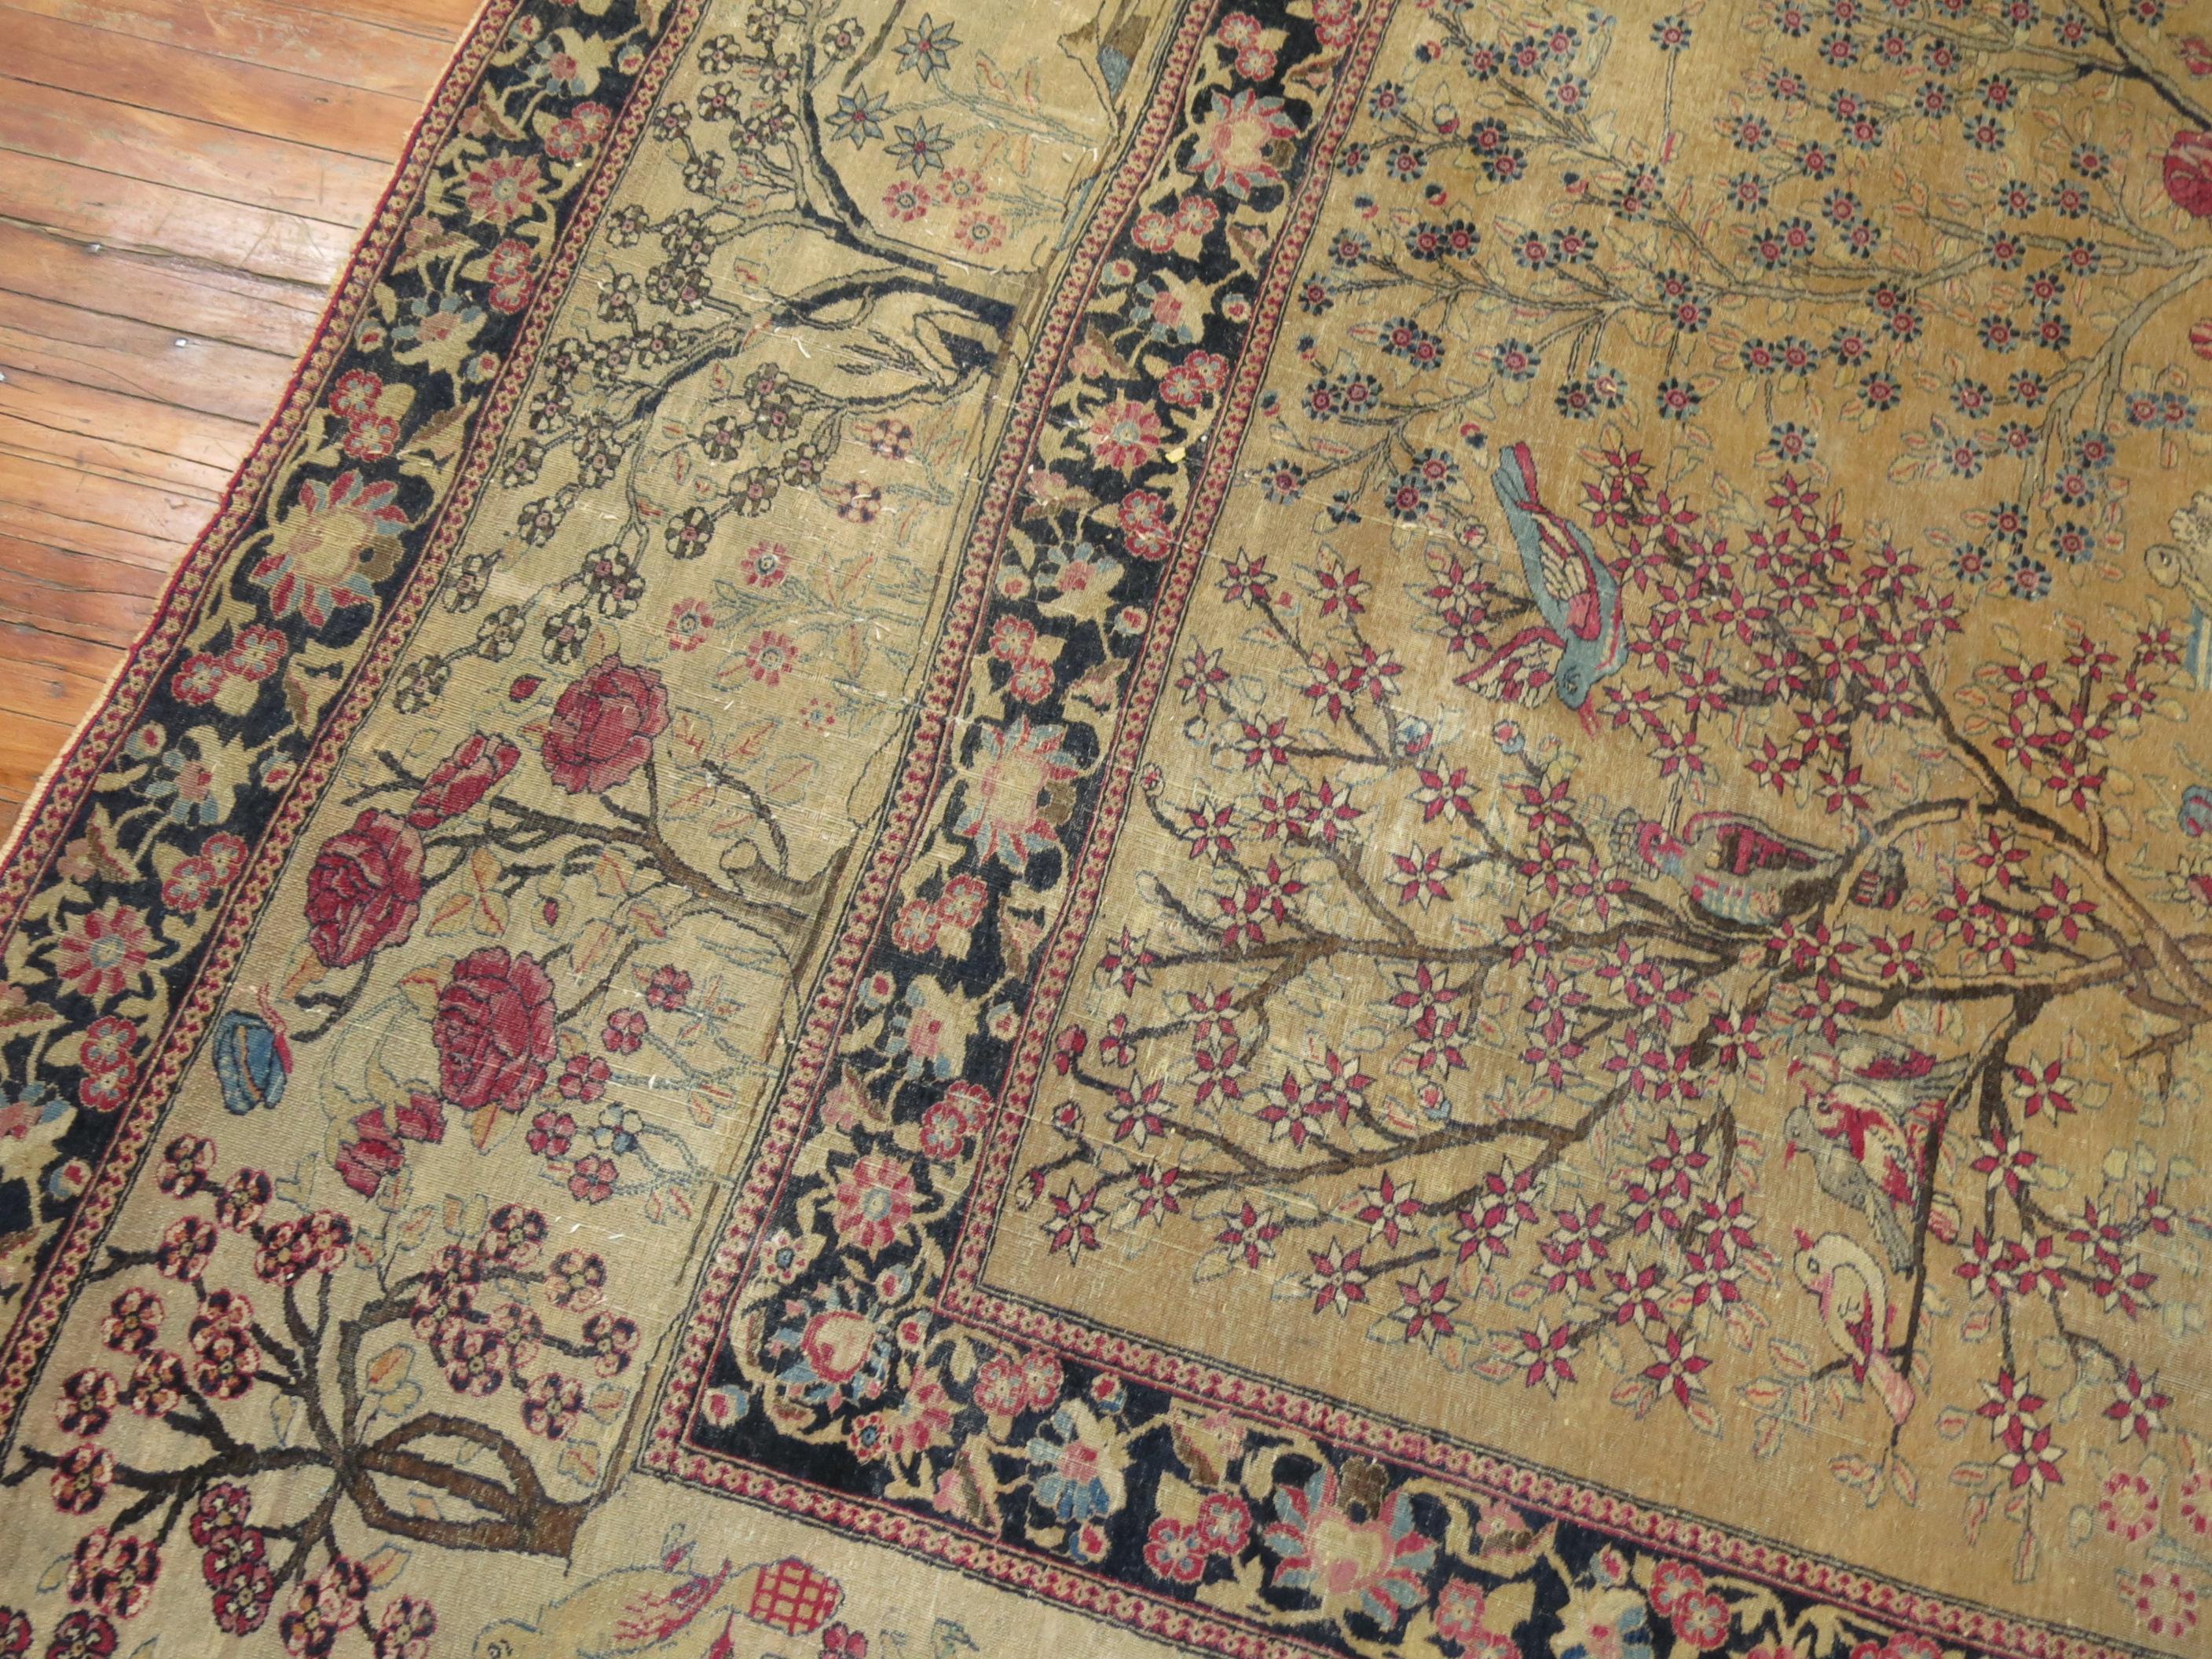 Persian Pictorial Animal Landscape Rug 8